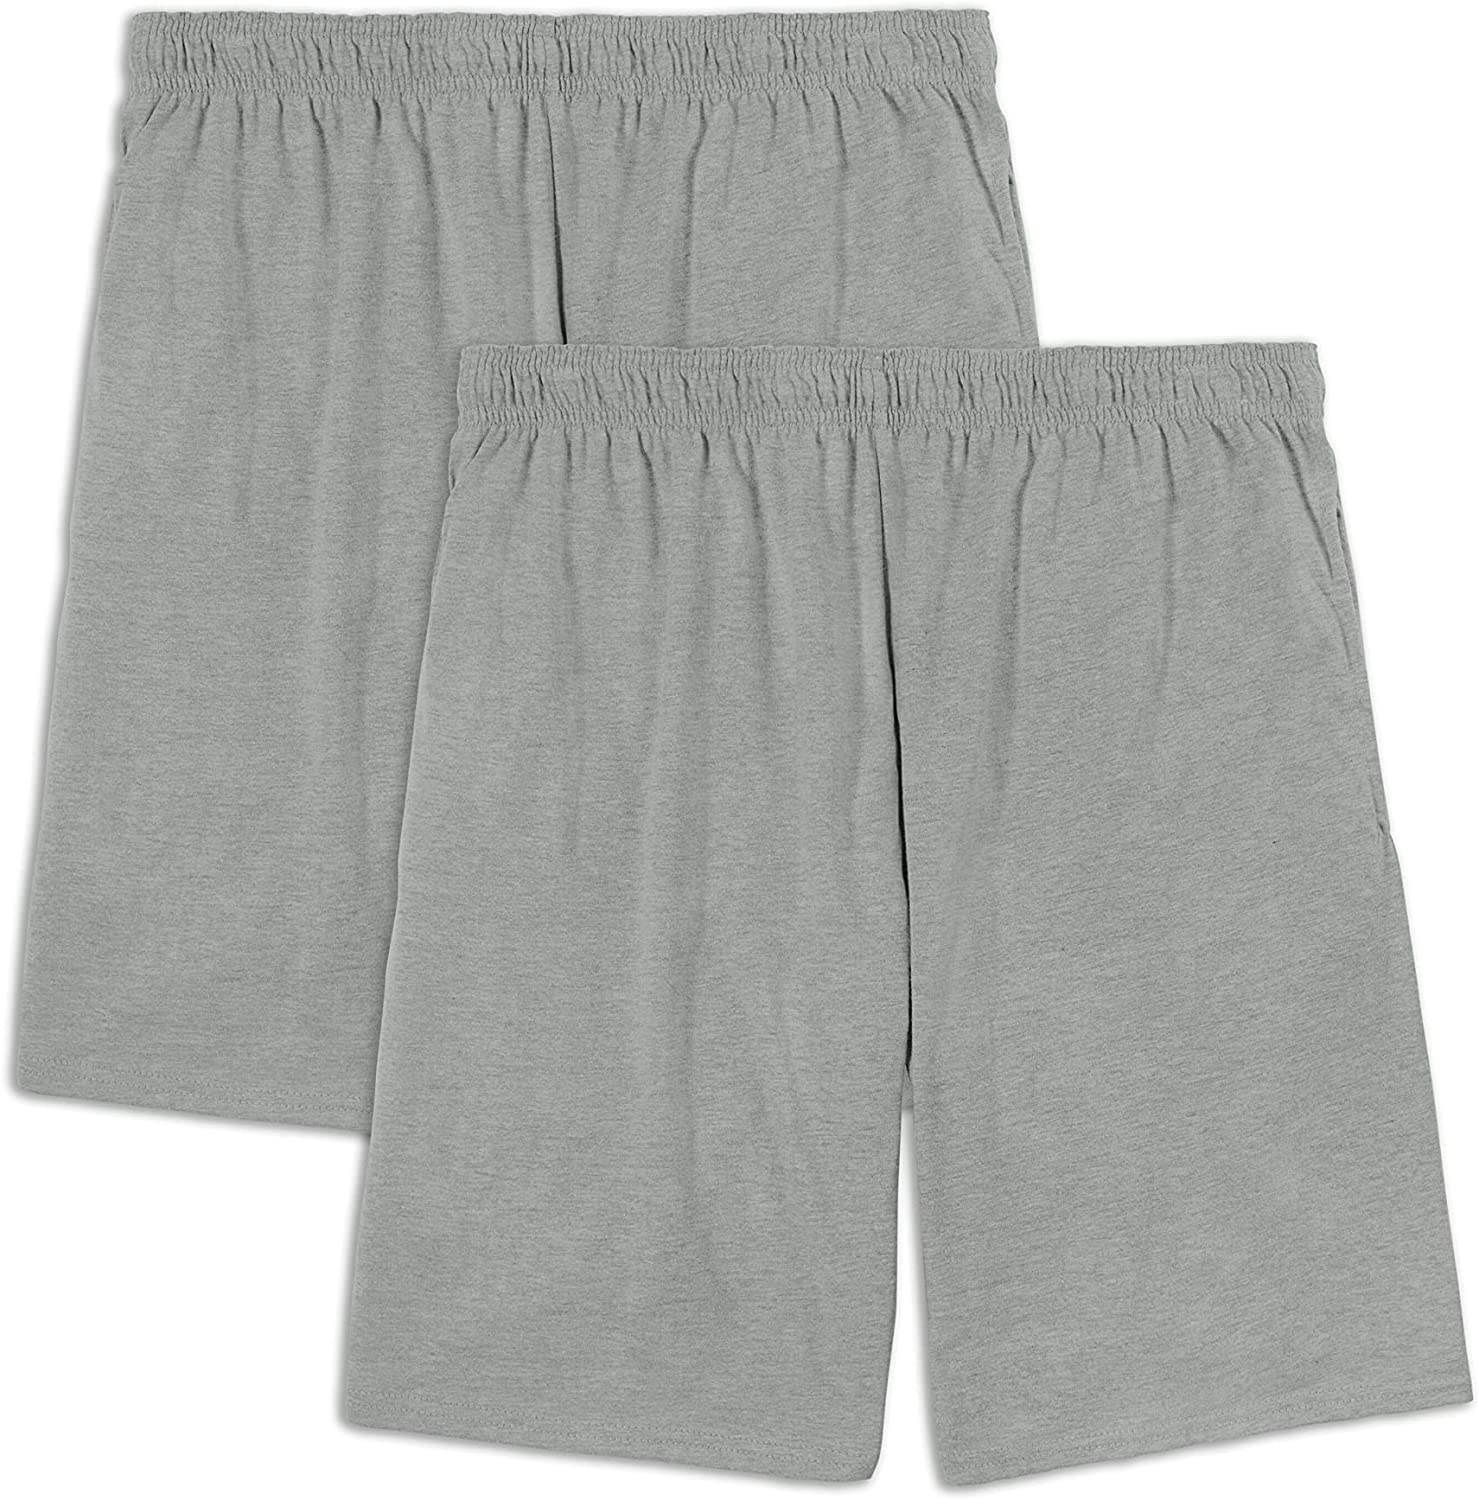 Fruit of the Loom Men's Eversoft Cotton Shorts with Pockets (S-4XL) | eBay